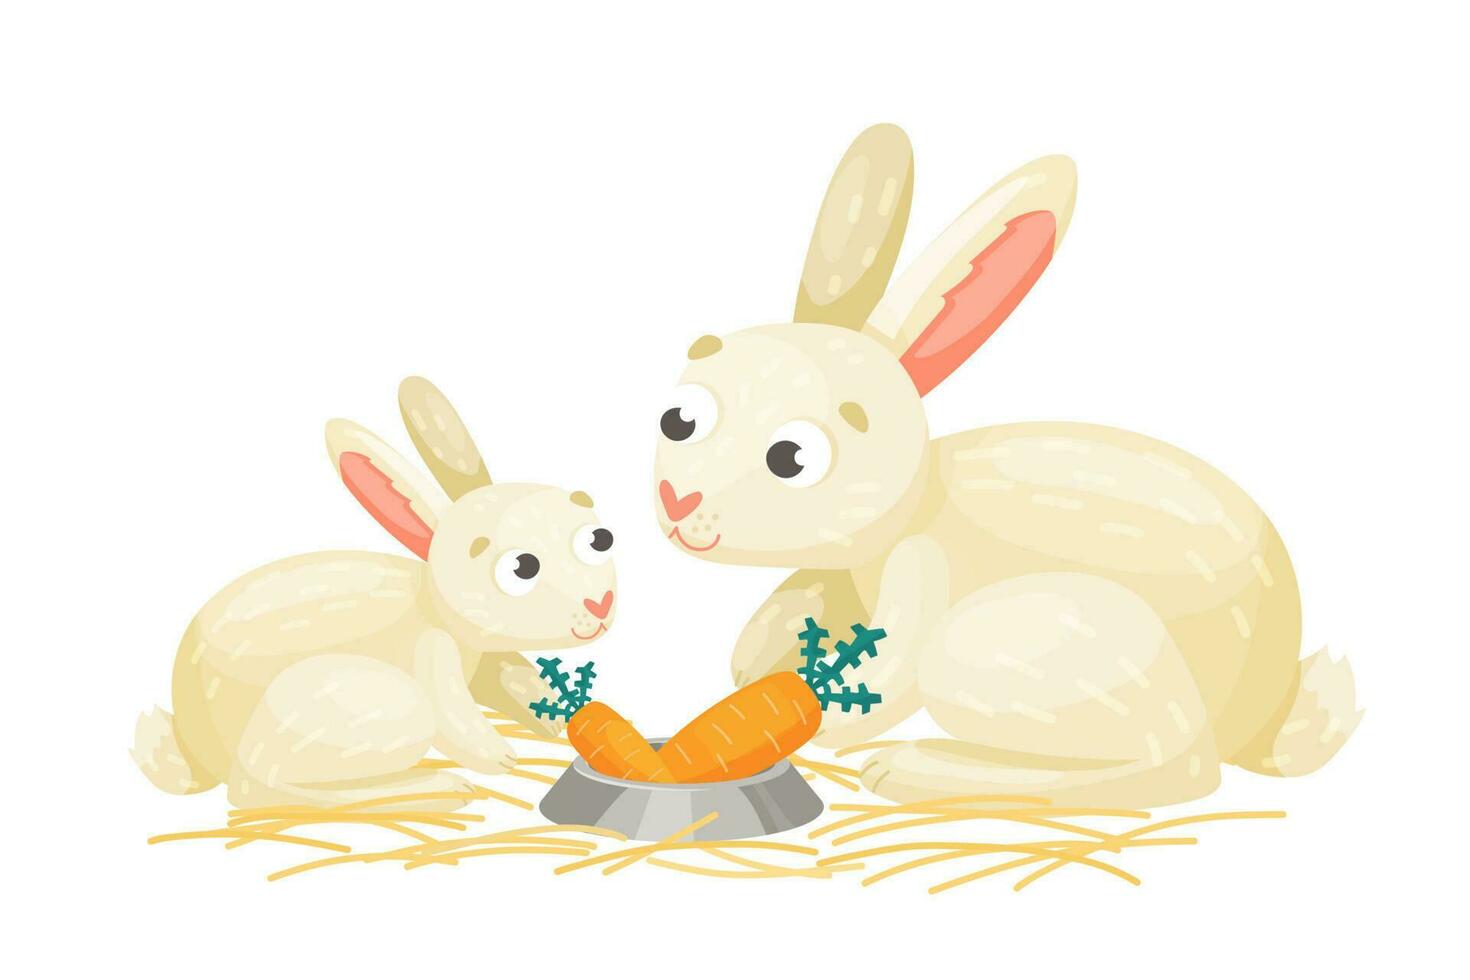 Mother and baby rabbit eating carrot. White Rabbits family. Cute vector cartoon illustration.